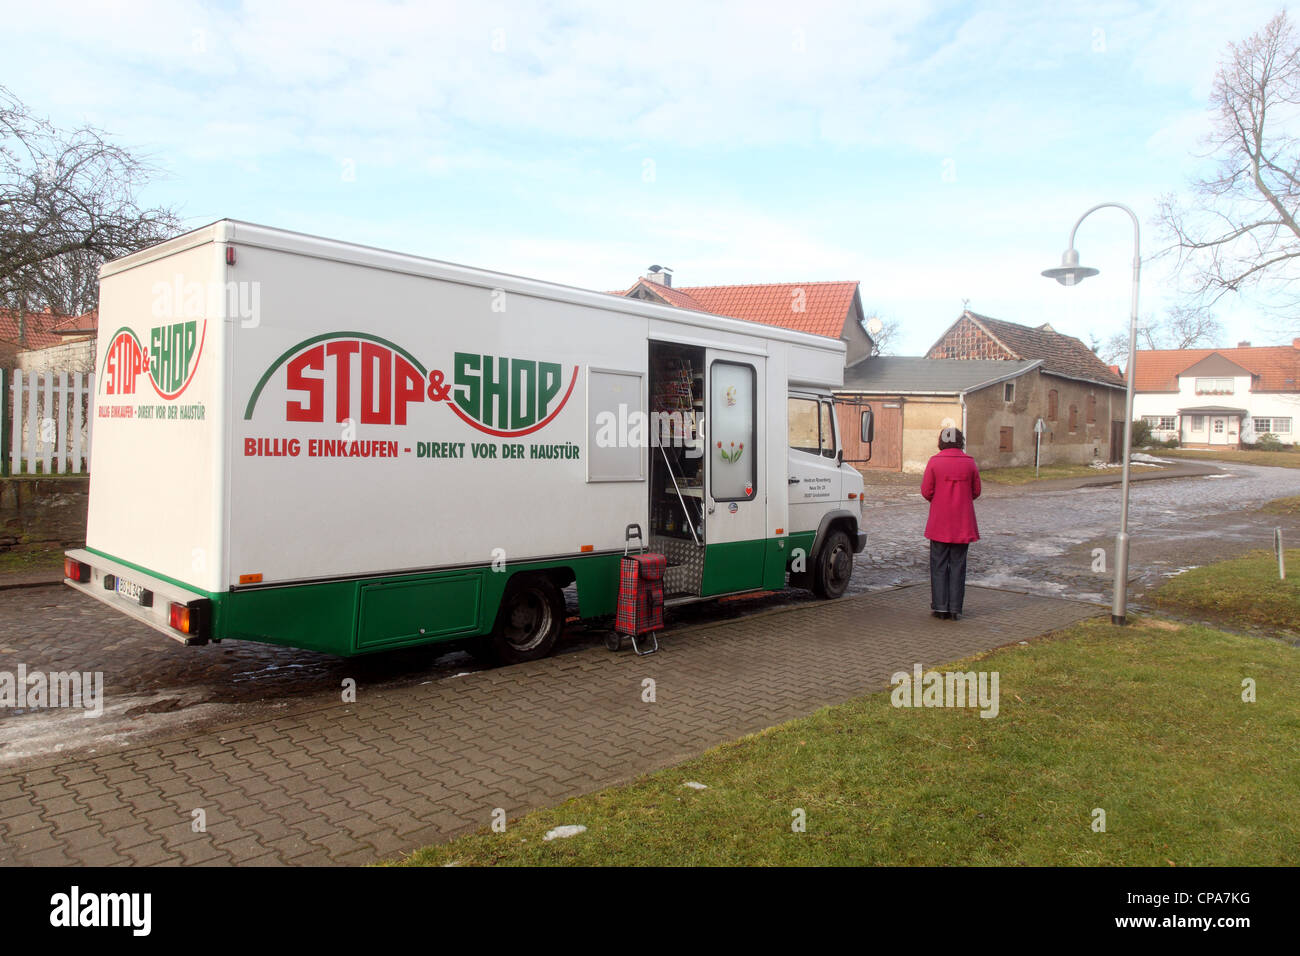 A private mobile grocery store, Druxberge, Germany Stock Photo